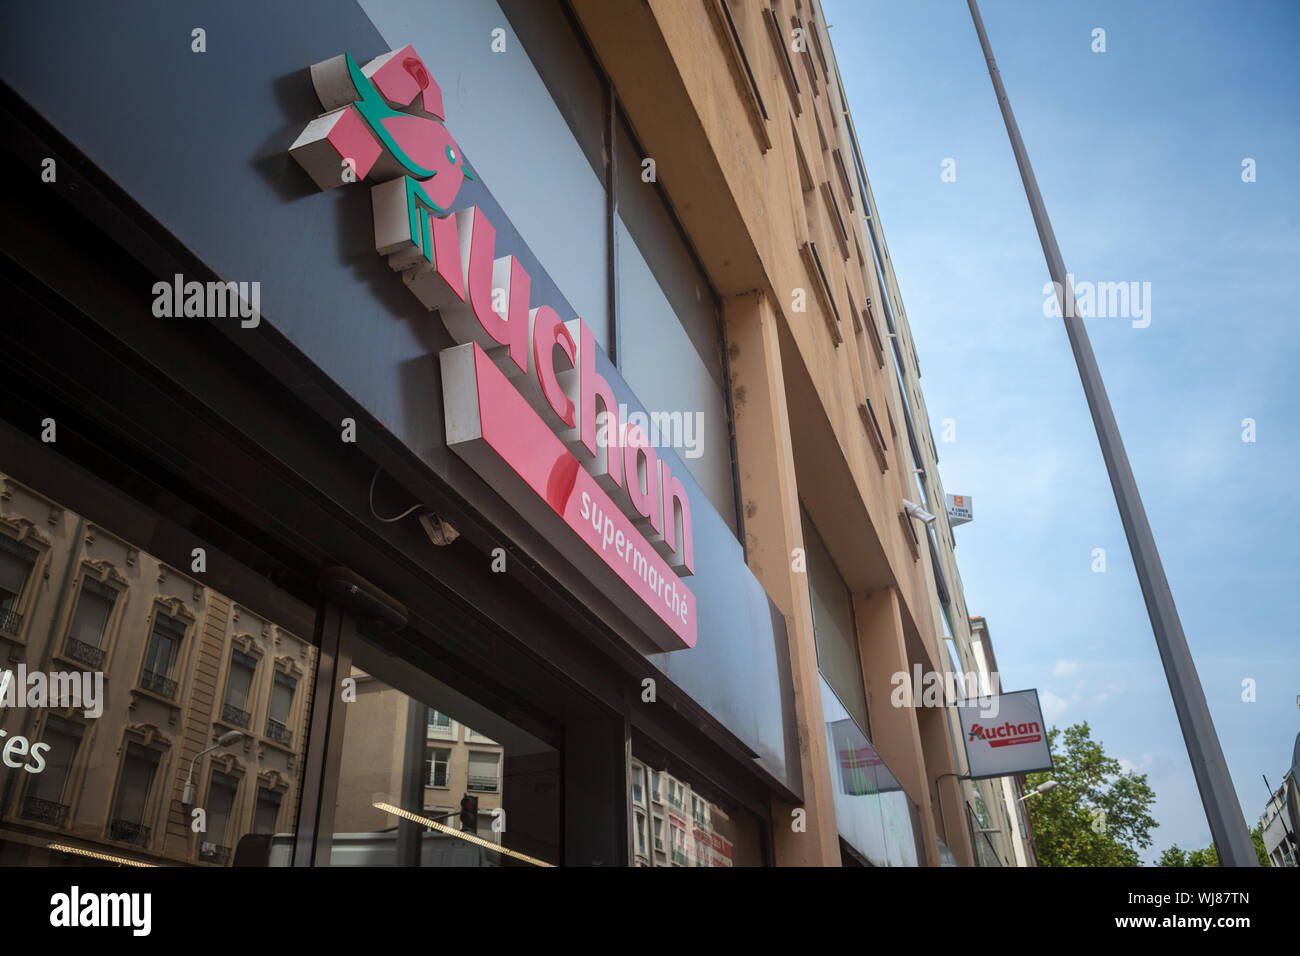 LYON, FRANCE - JULY 18, 2019: Auchan logo in front of their local supermarket in Lyon. Auchan is a French retailer of supermarkets and hypermarkets sp Stock Photo